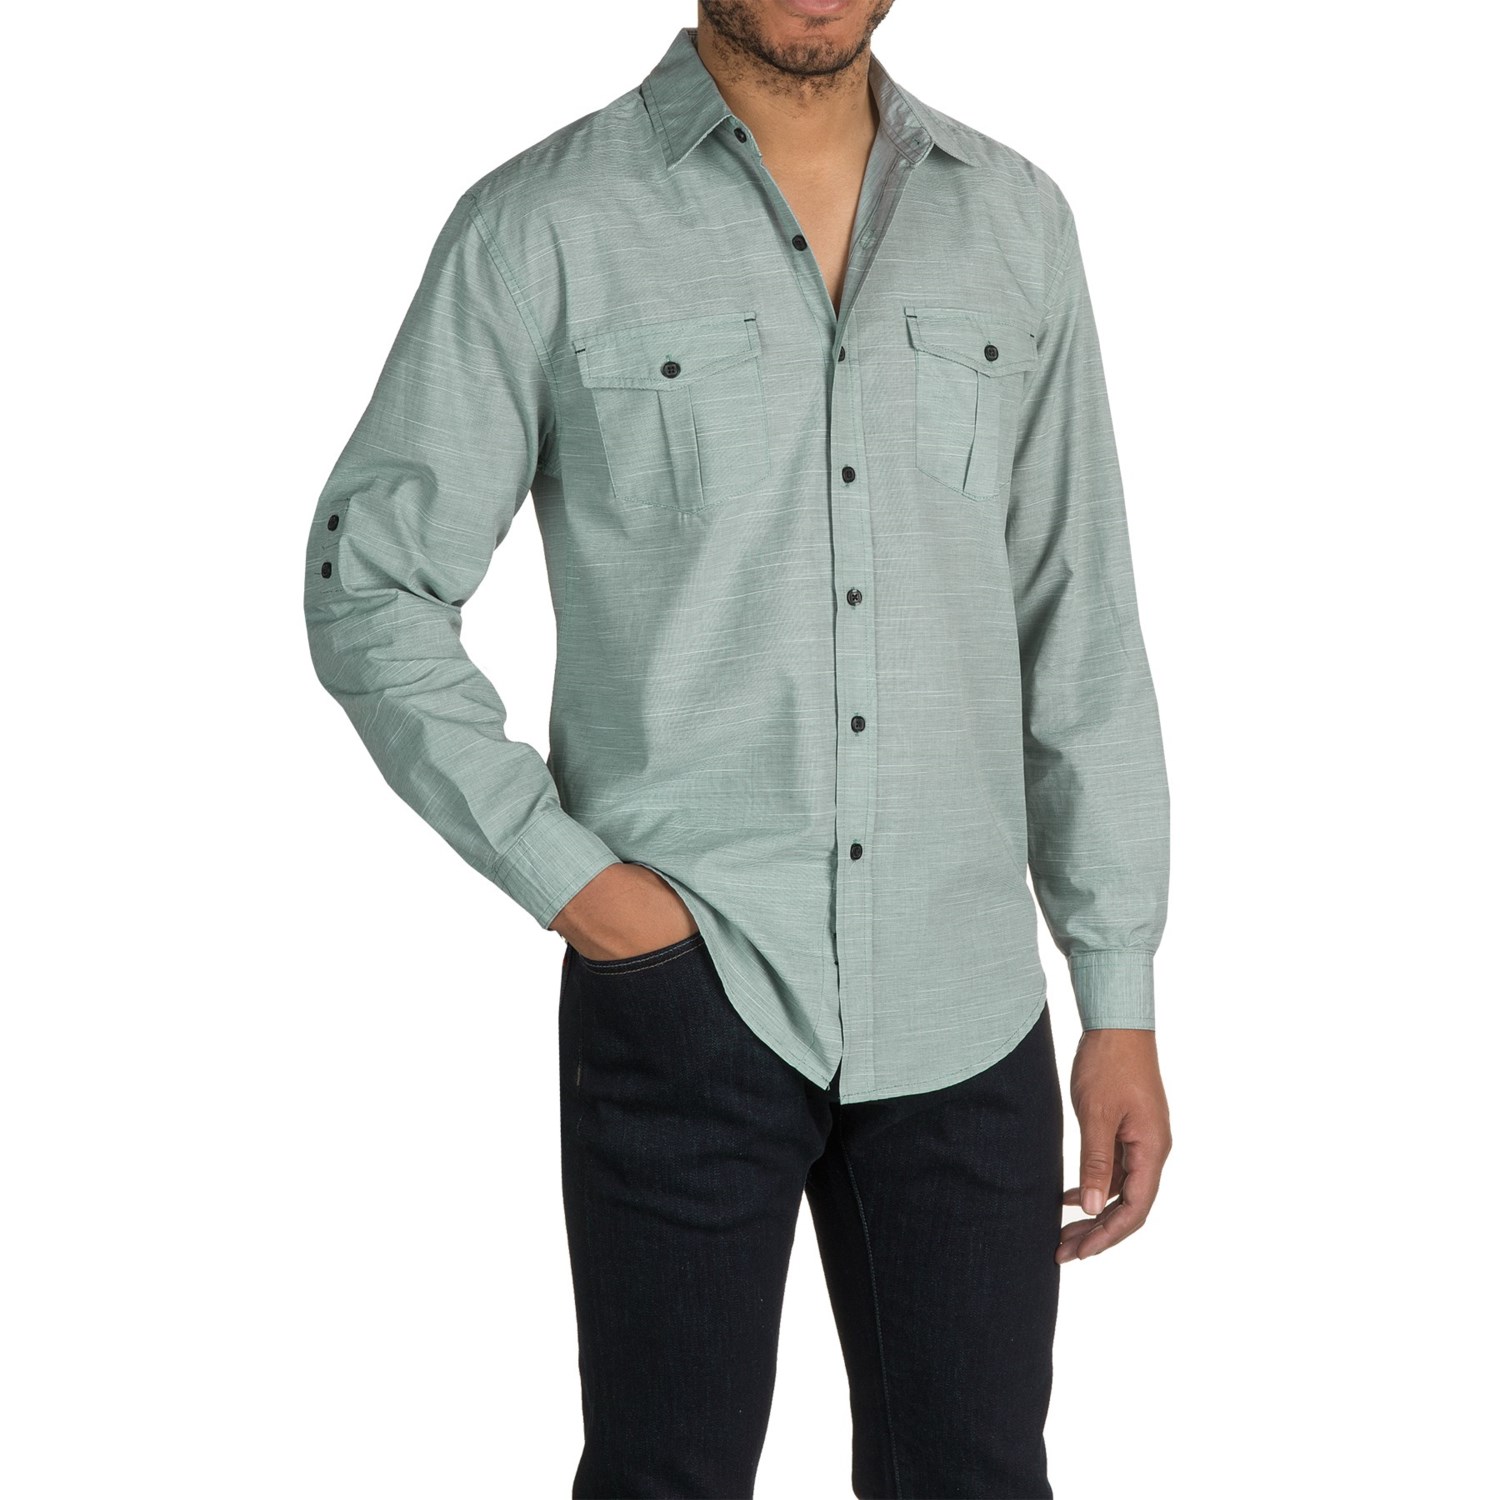 Bruno Space-Dyed Button-Up Shirt (For Men) - Save 50%